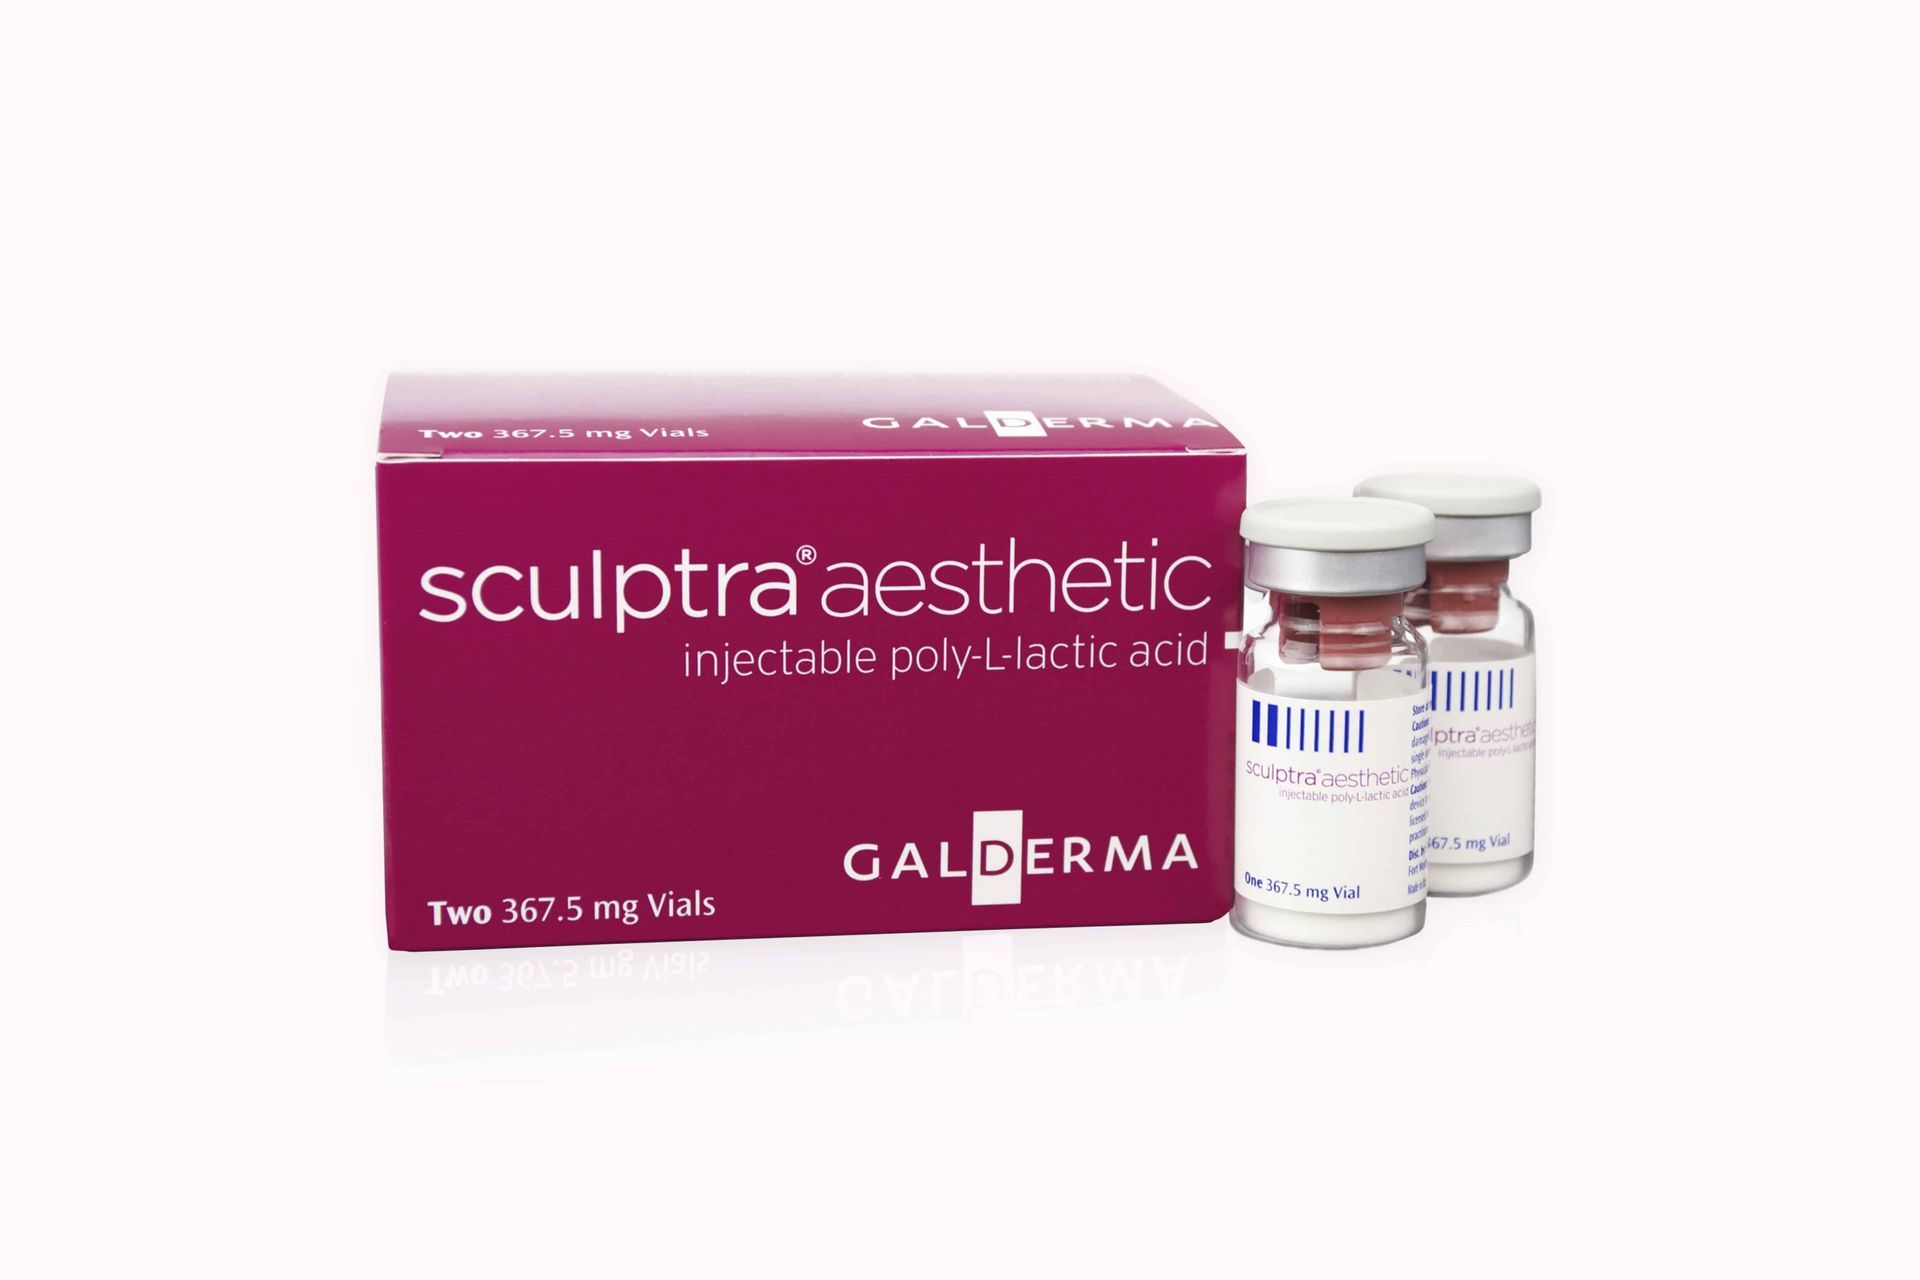 A box of Sculptra aesthetic injections by Gaiderma